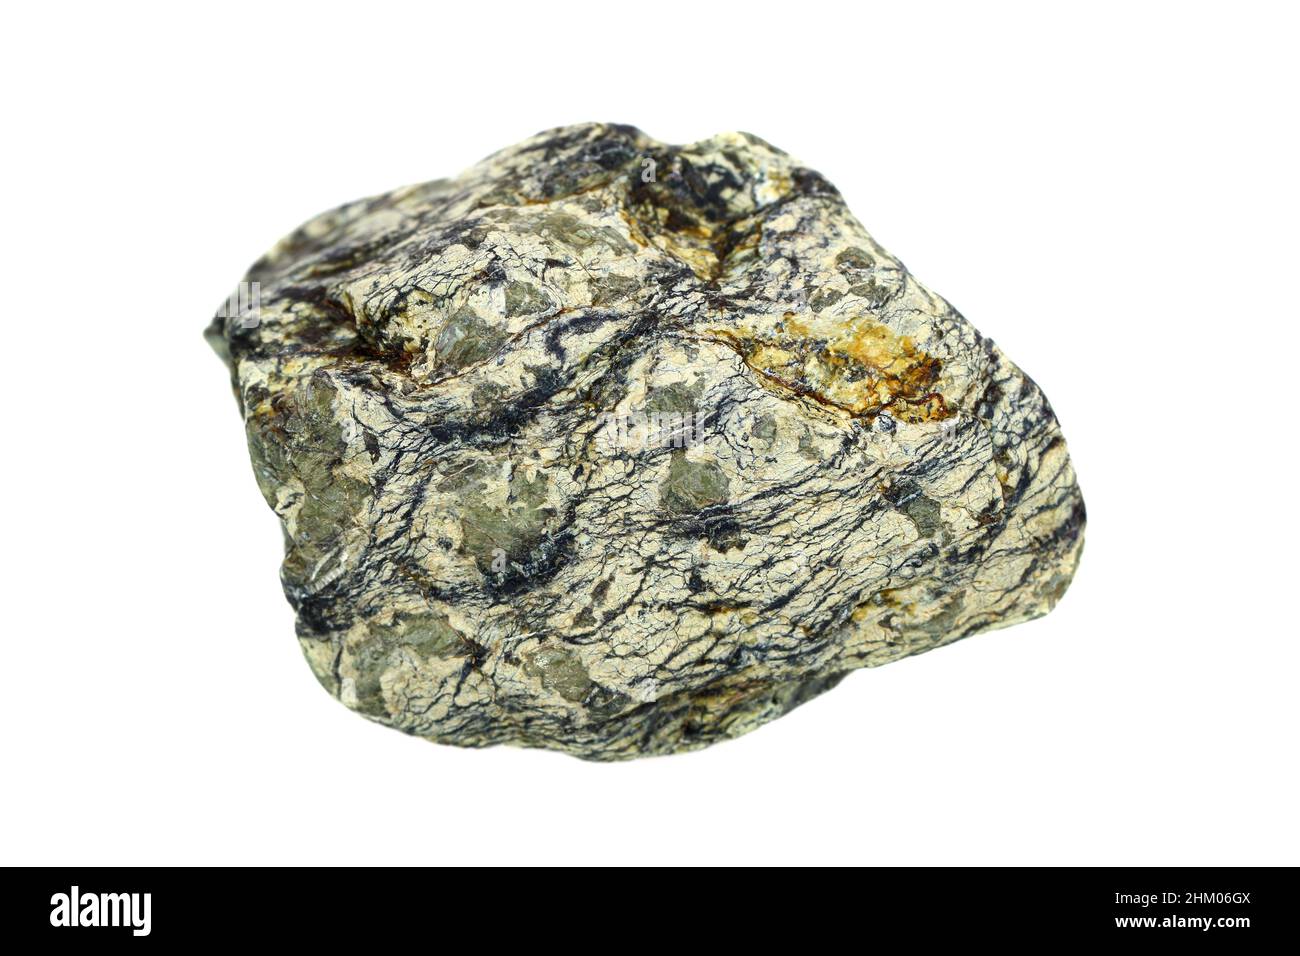 Natural rough serpentinite stone from Southeast Asia, a metamorphic rock composed of serpentine group minerals (Antigorite, Lizardite, and Chrysotile) Stock Photo